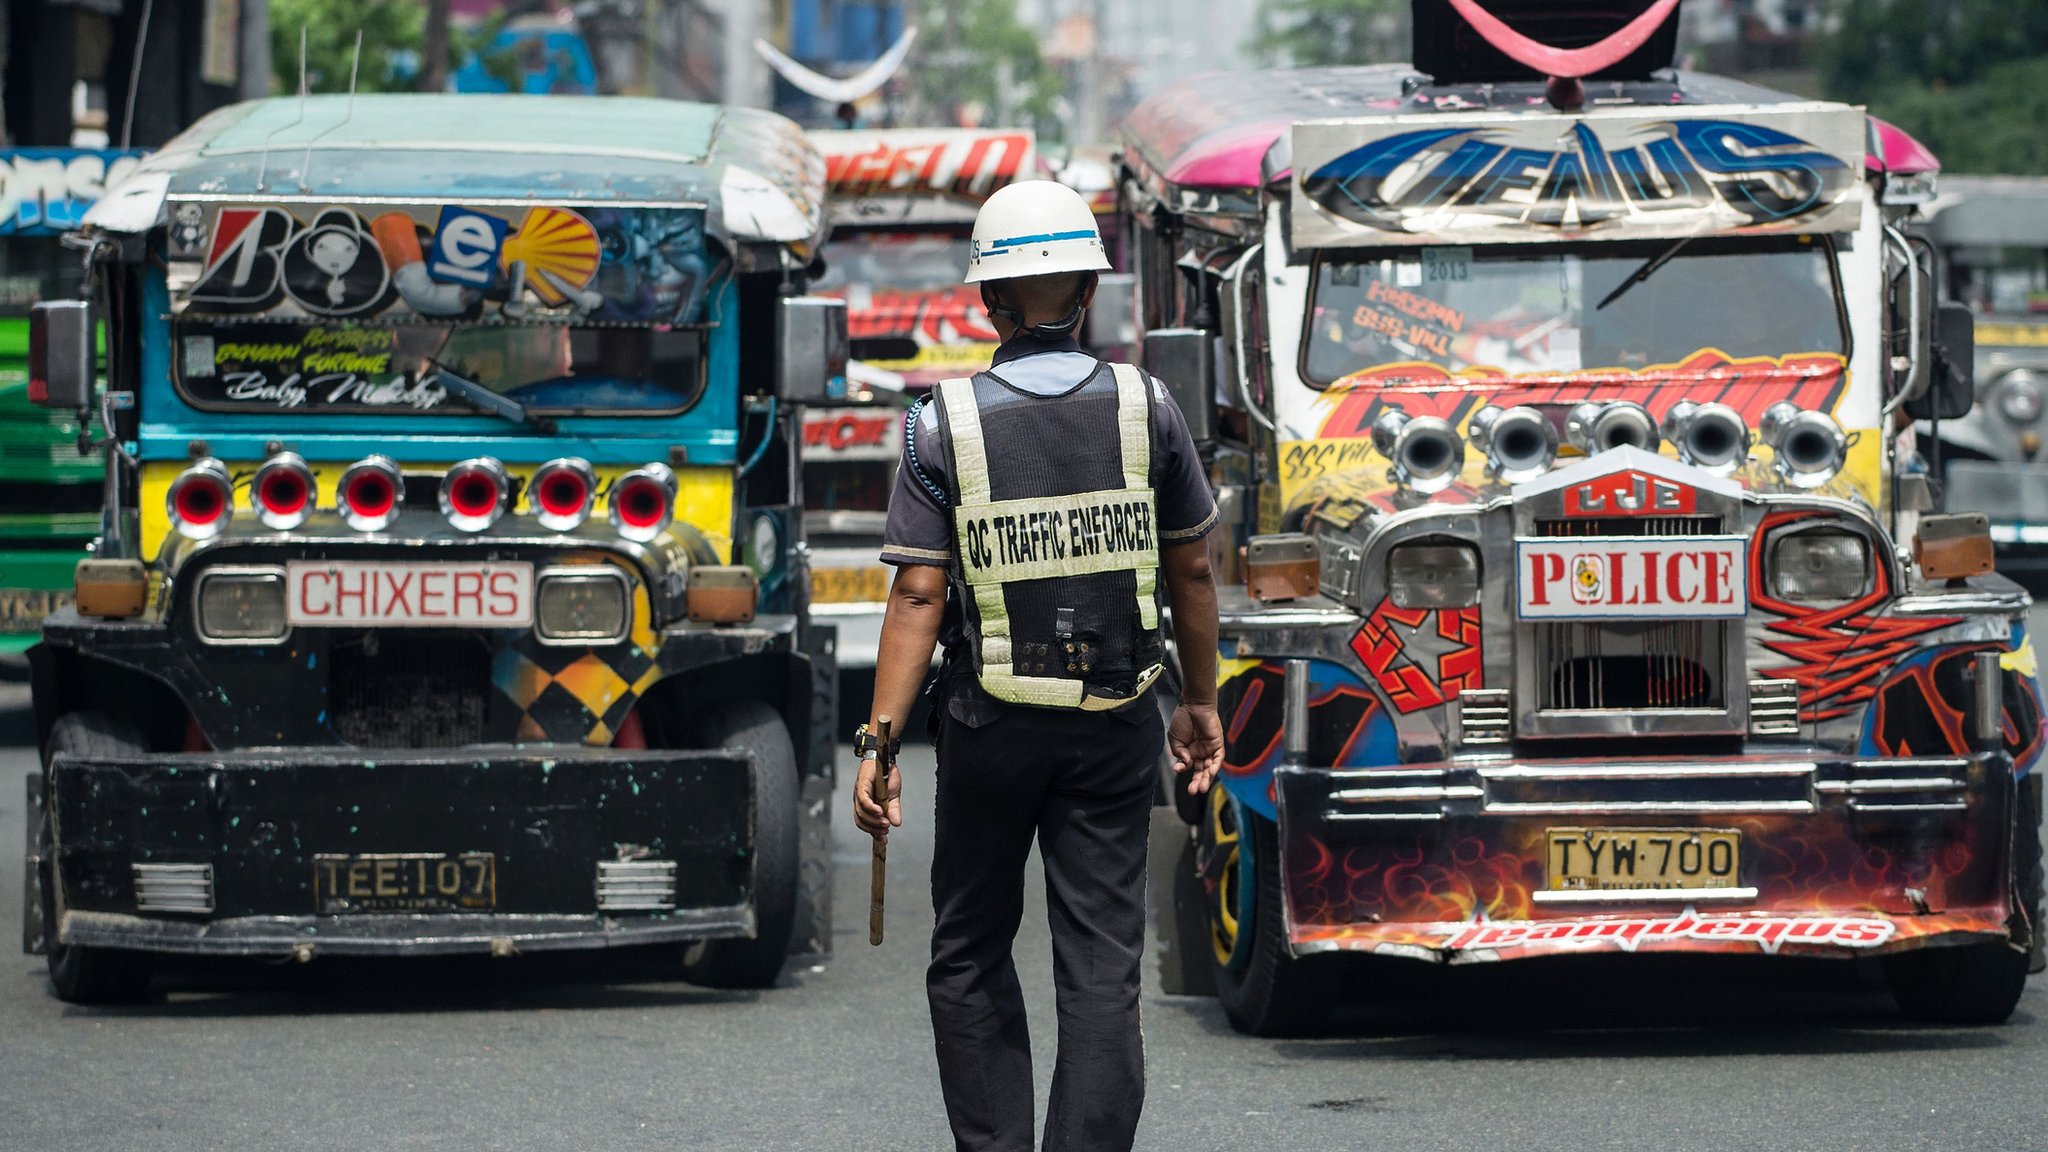 Jeepney drivers in Philippines to go on 3-day strike starting Monday